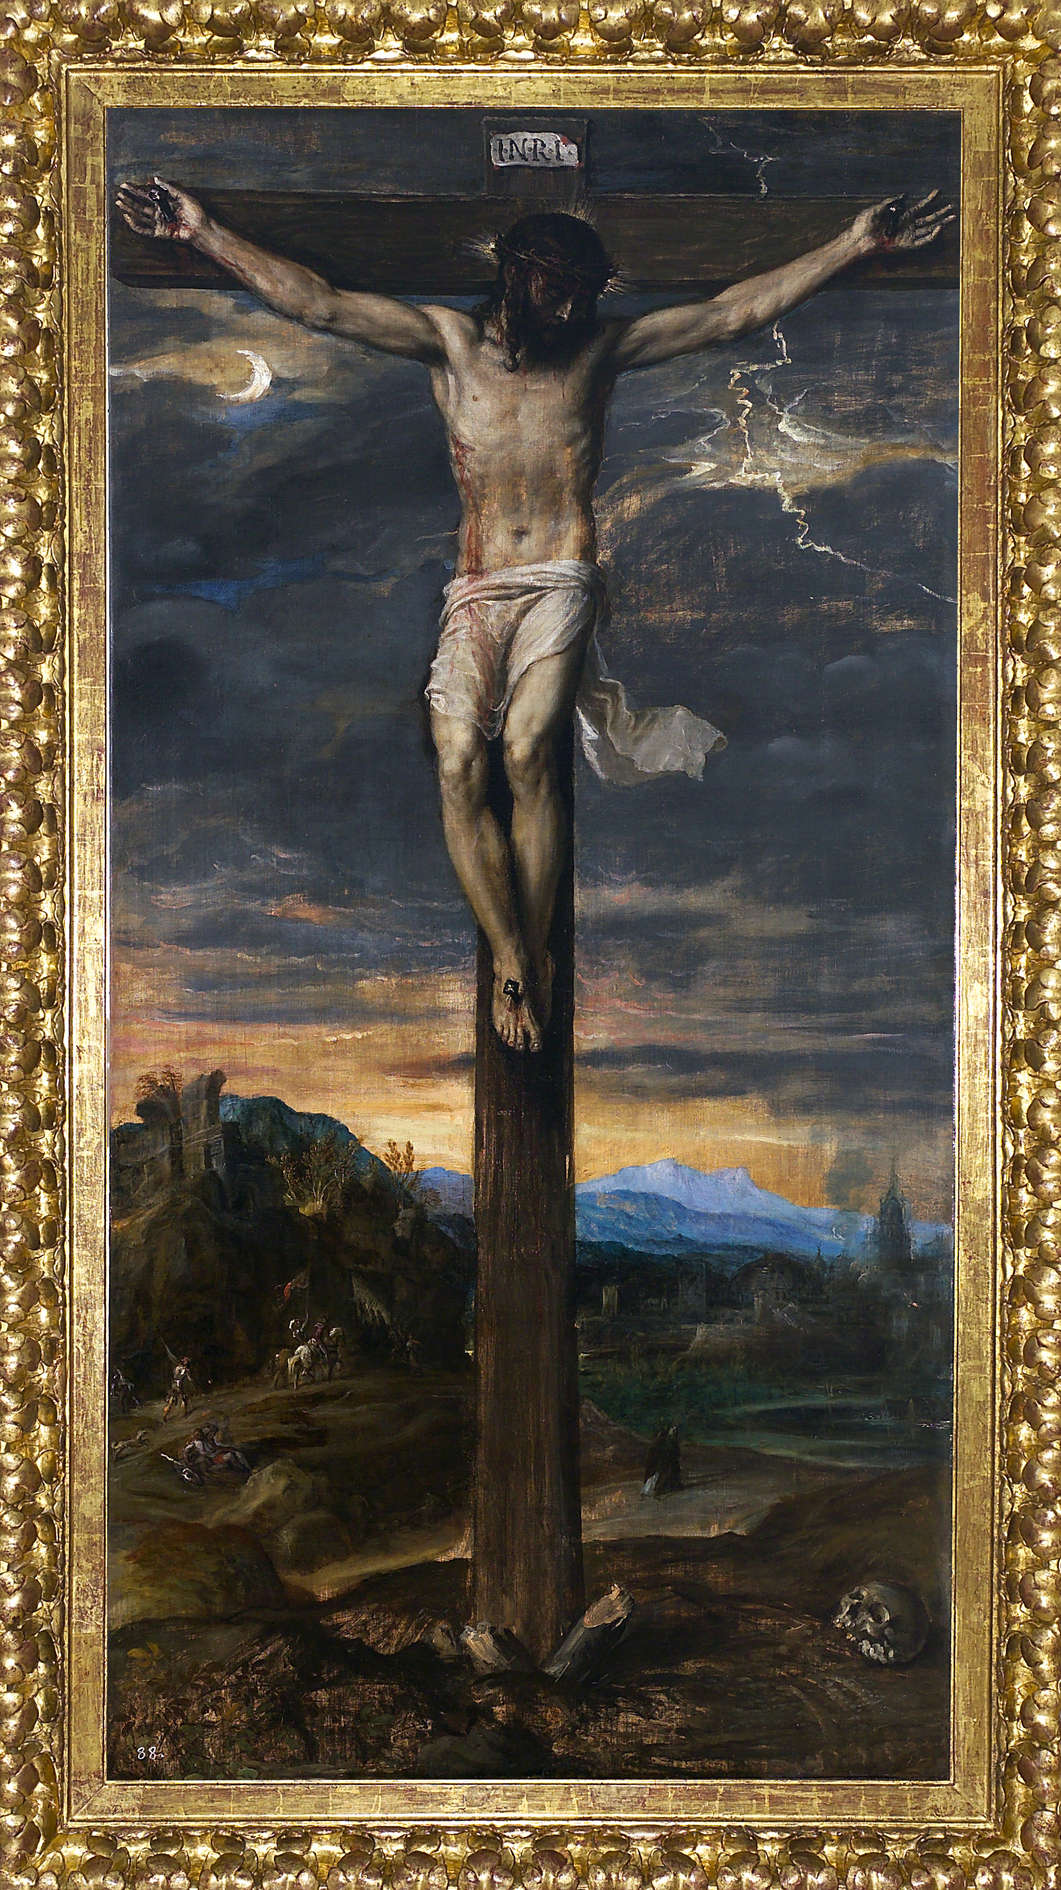 Titian, Christ Crucified (c. 1565; oil on canvas, 219 x 111 cm; Madrid, Royal Collections Gallery)